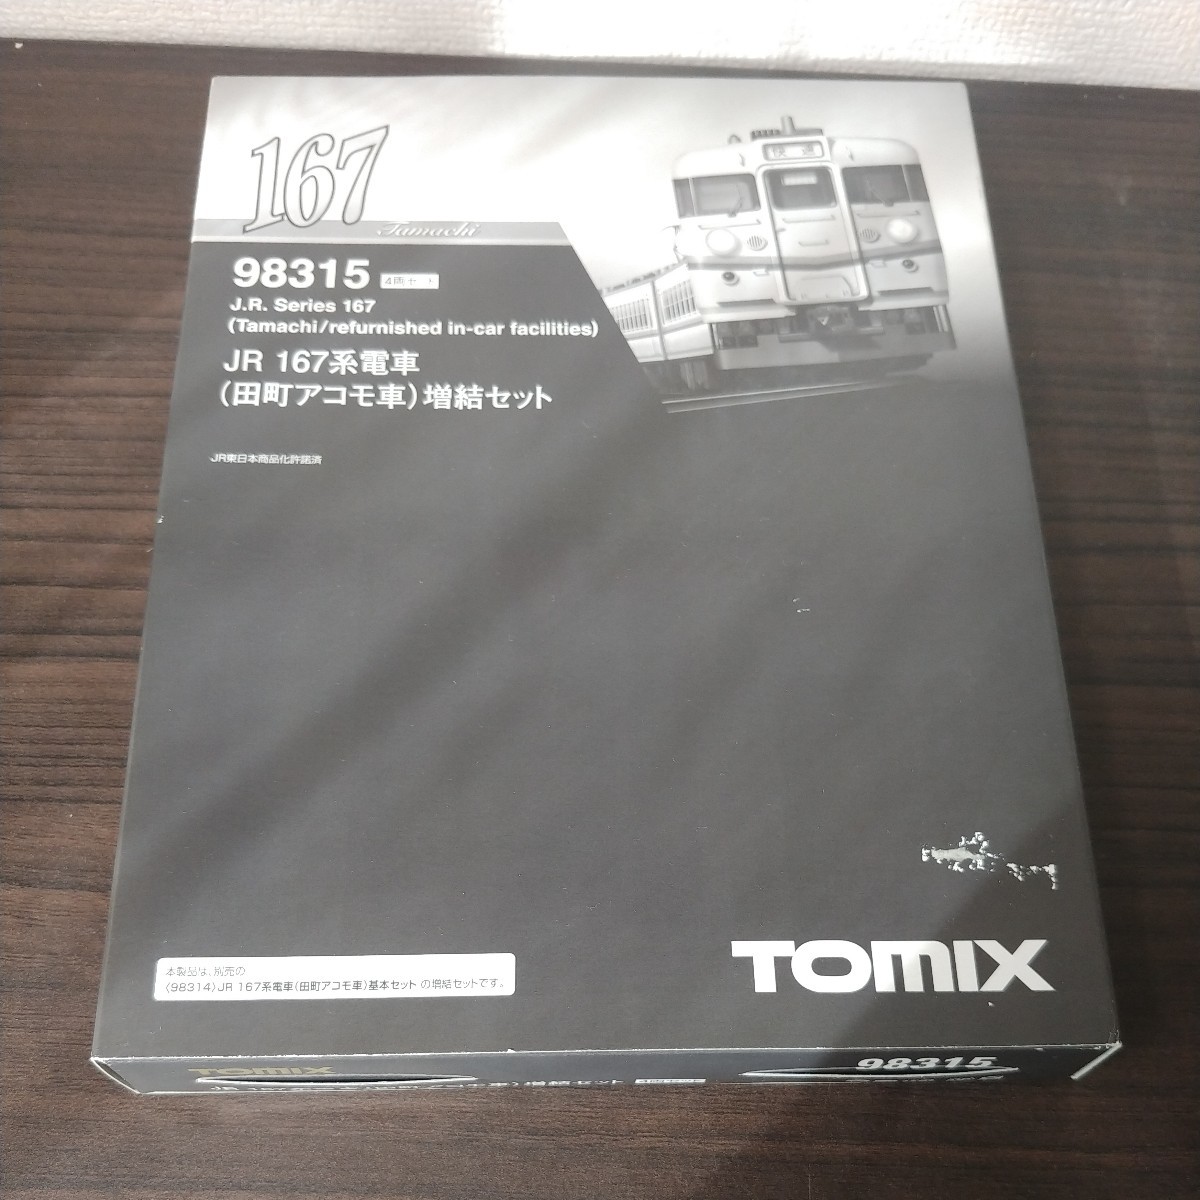 TOMIX JR 167系電車（田町アコモ車）増結セット 98315　トミックス